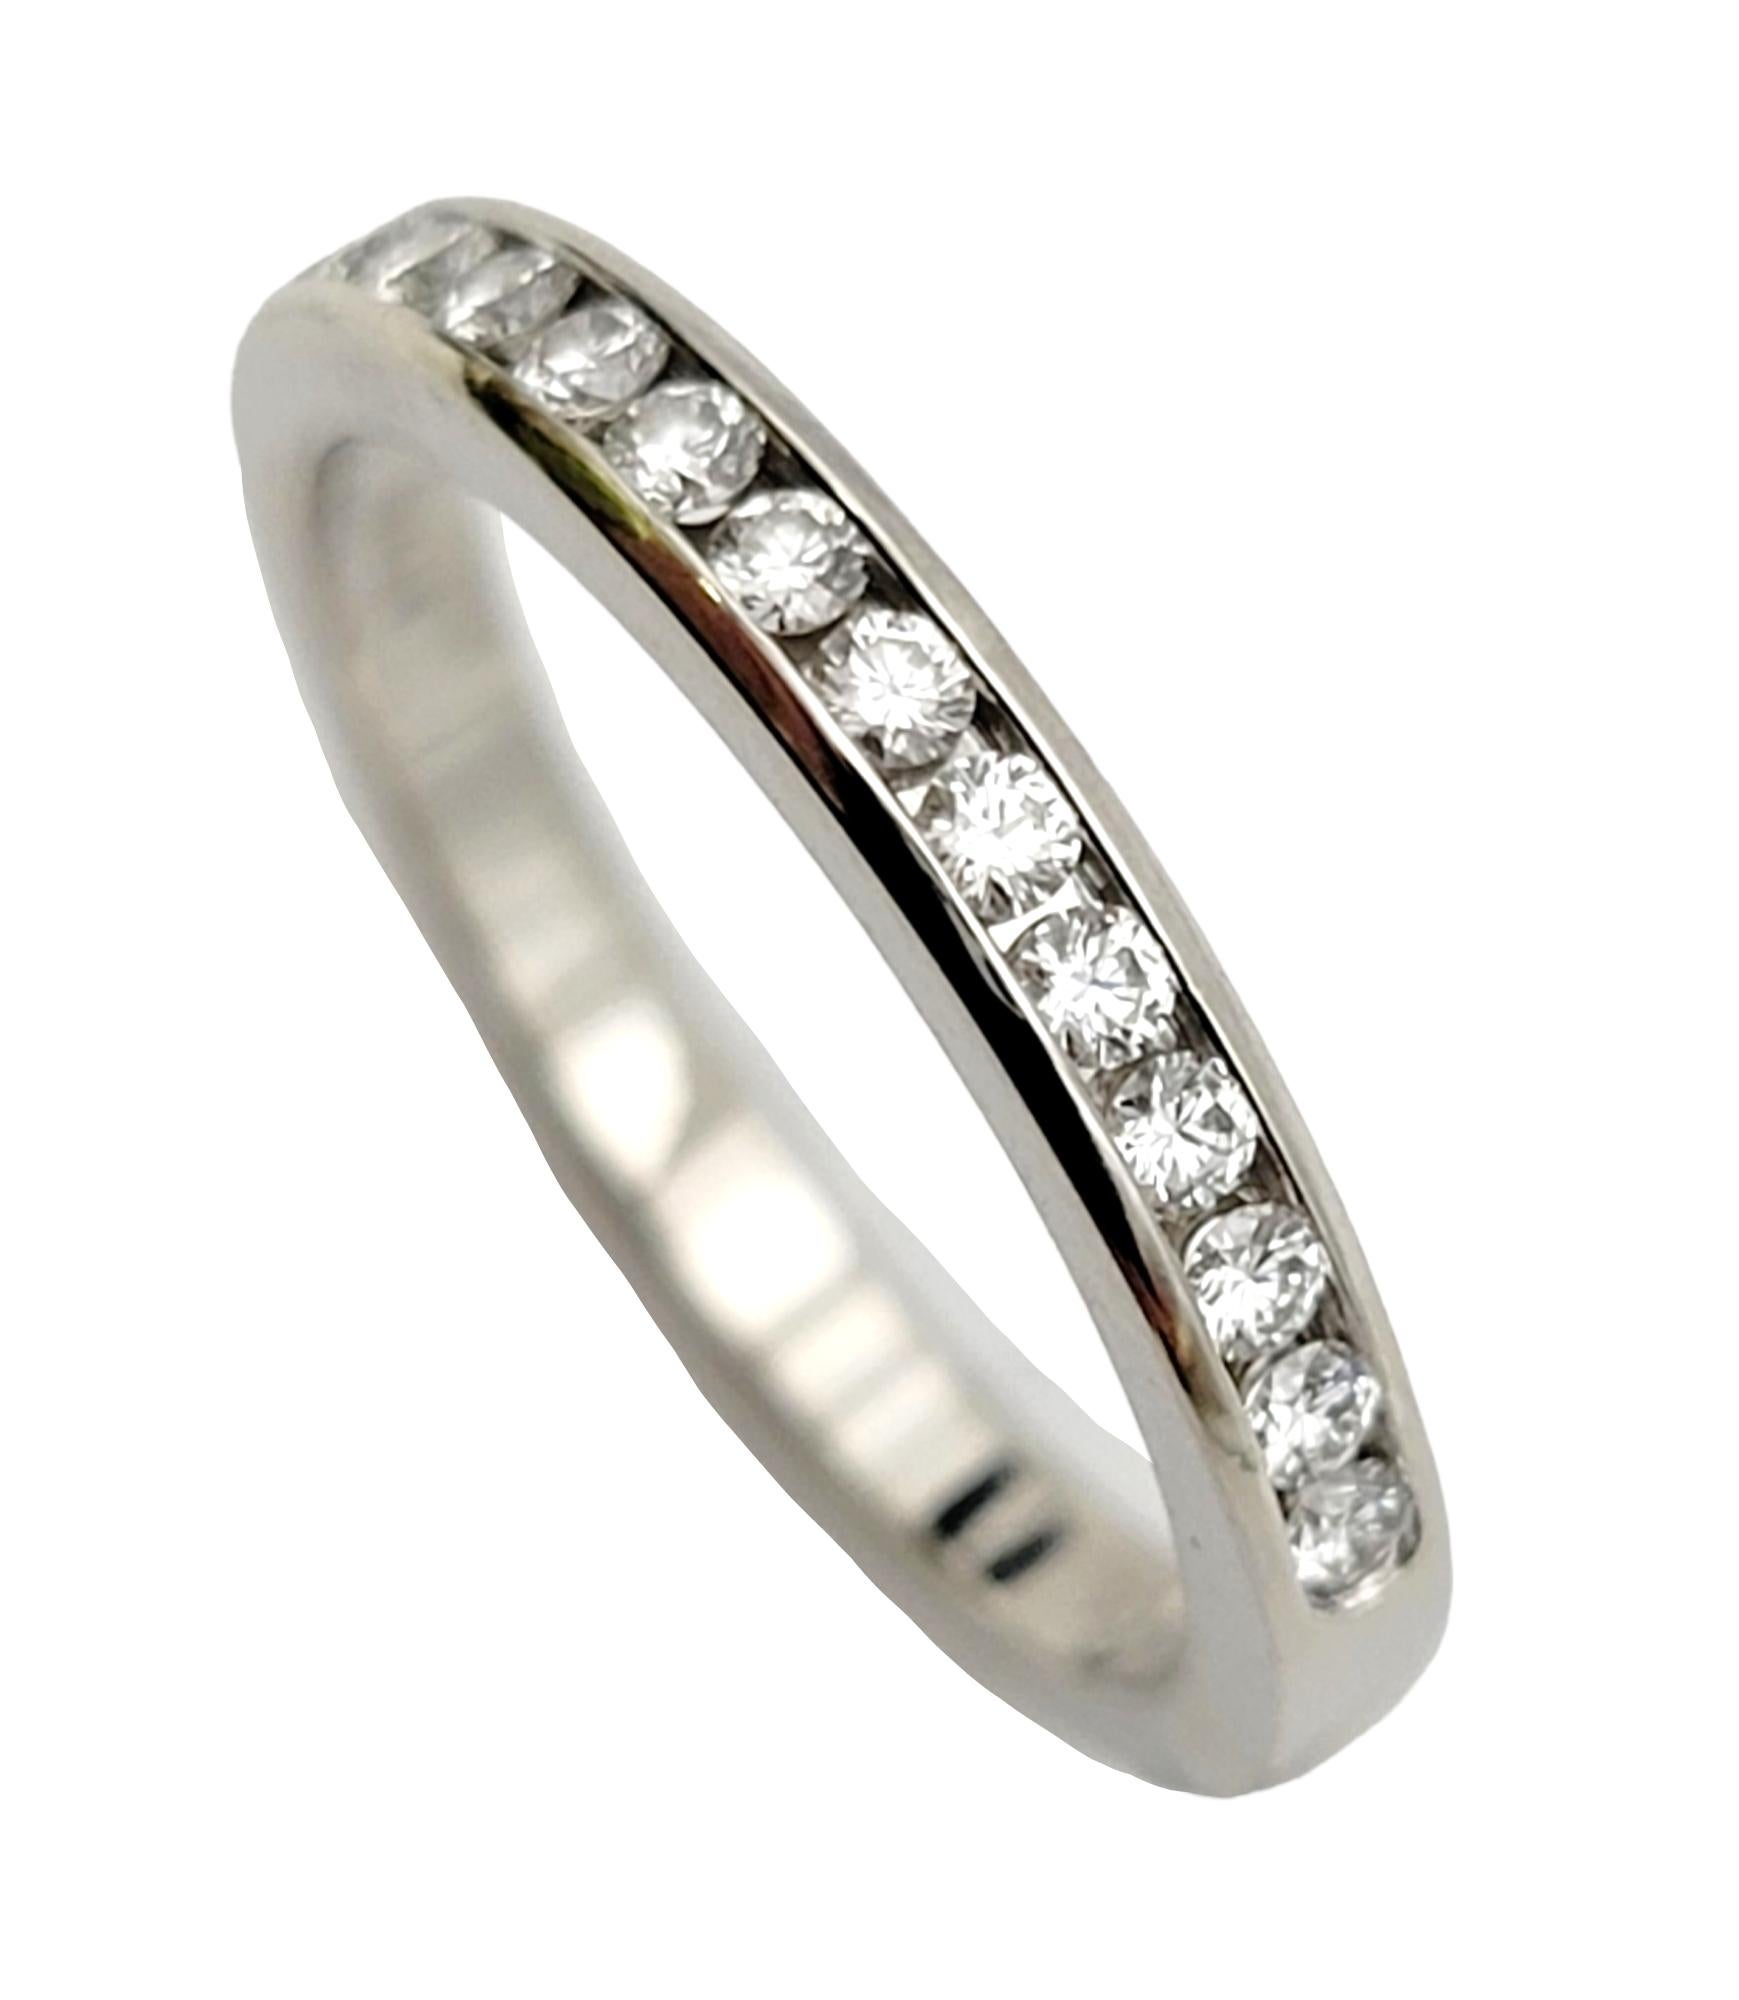 Tiffany & Co. Channel Set Semi Eternity Diamond Wedding Band Ring Platinum 5.25 In Excellent Condition For Sale In Scottsdale, AZ